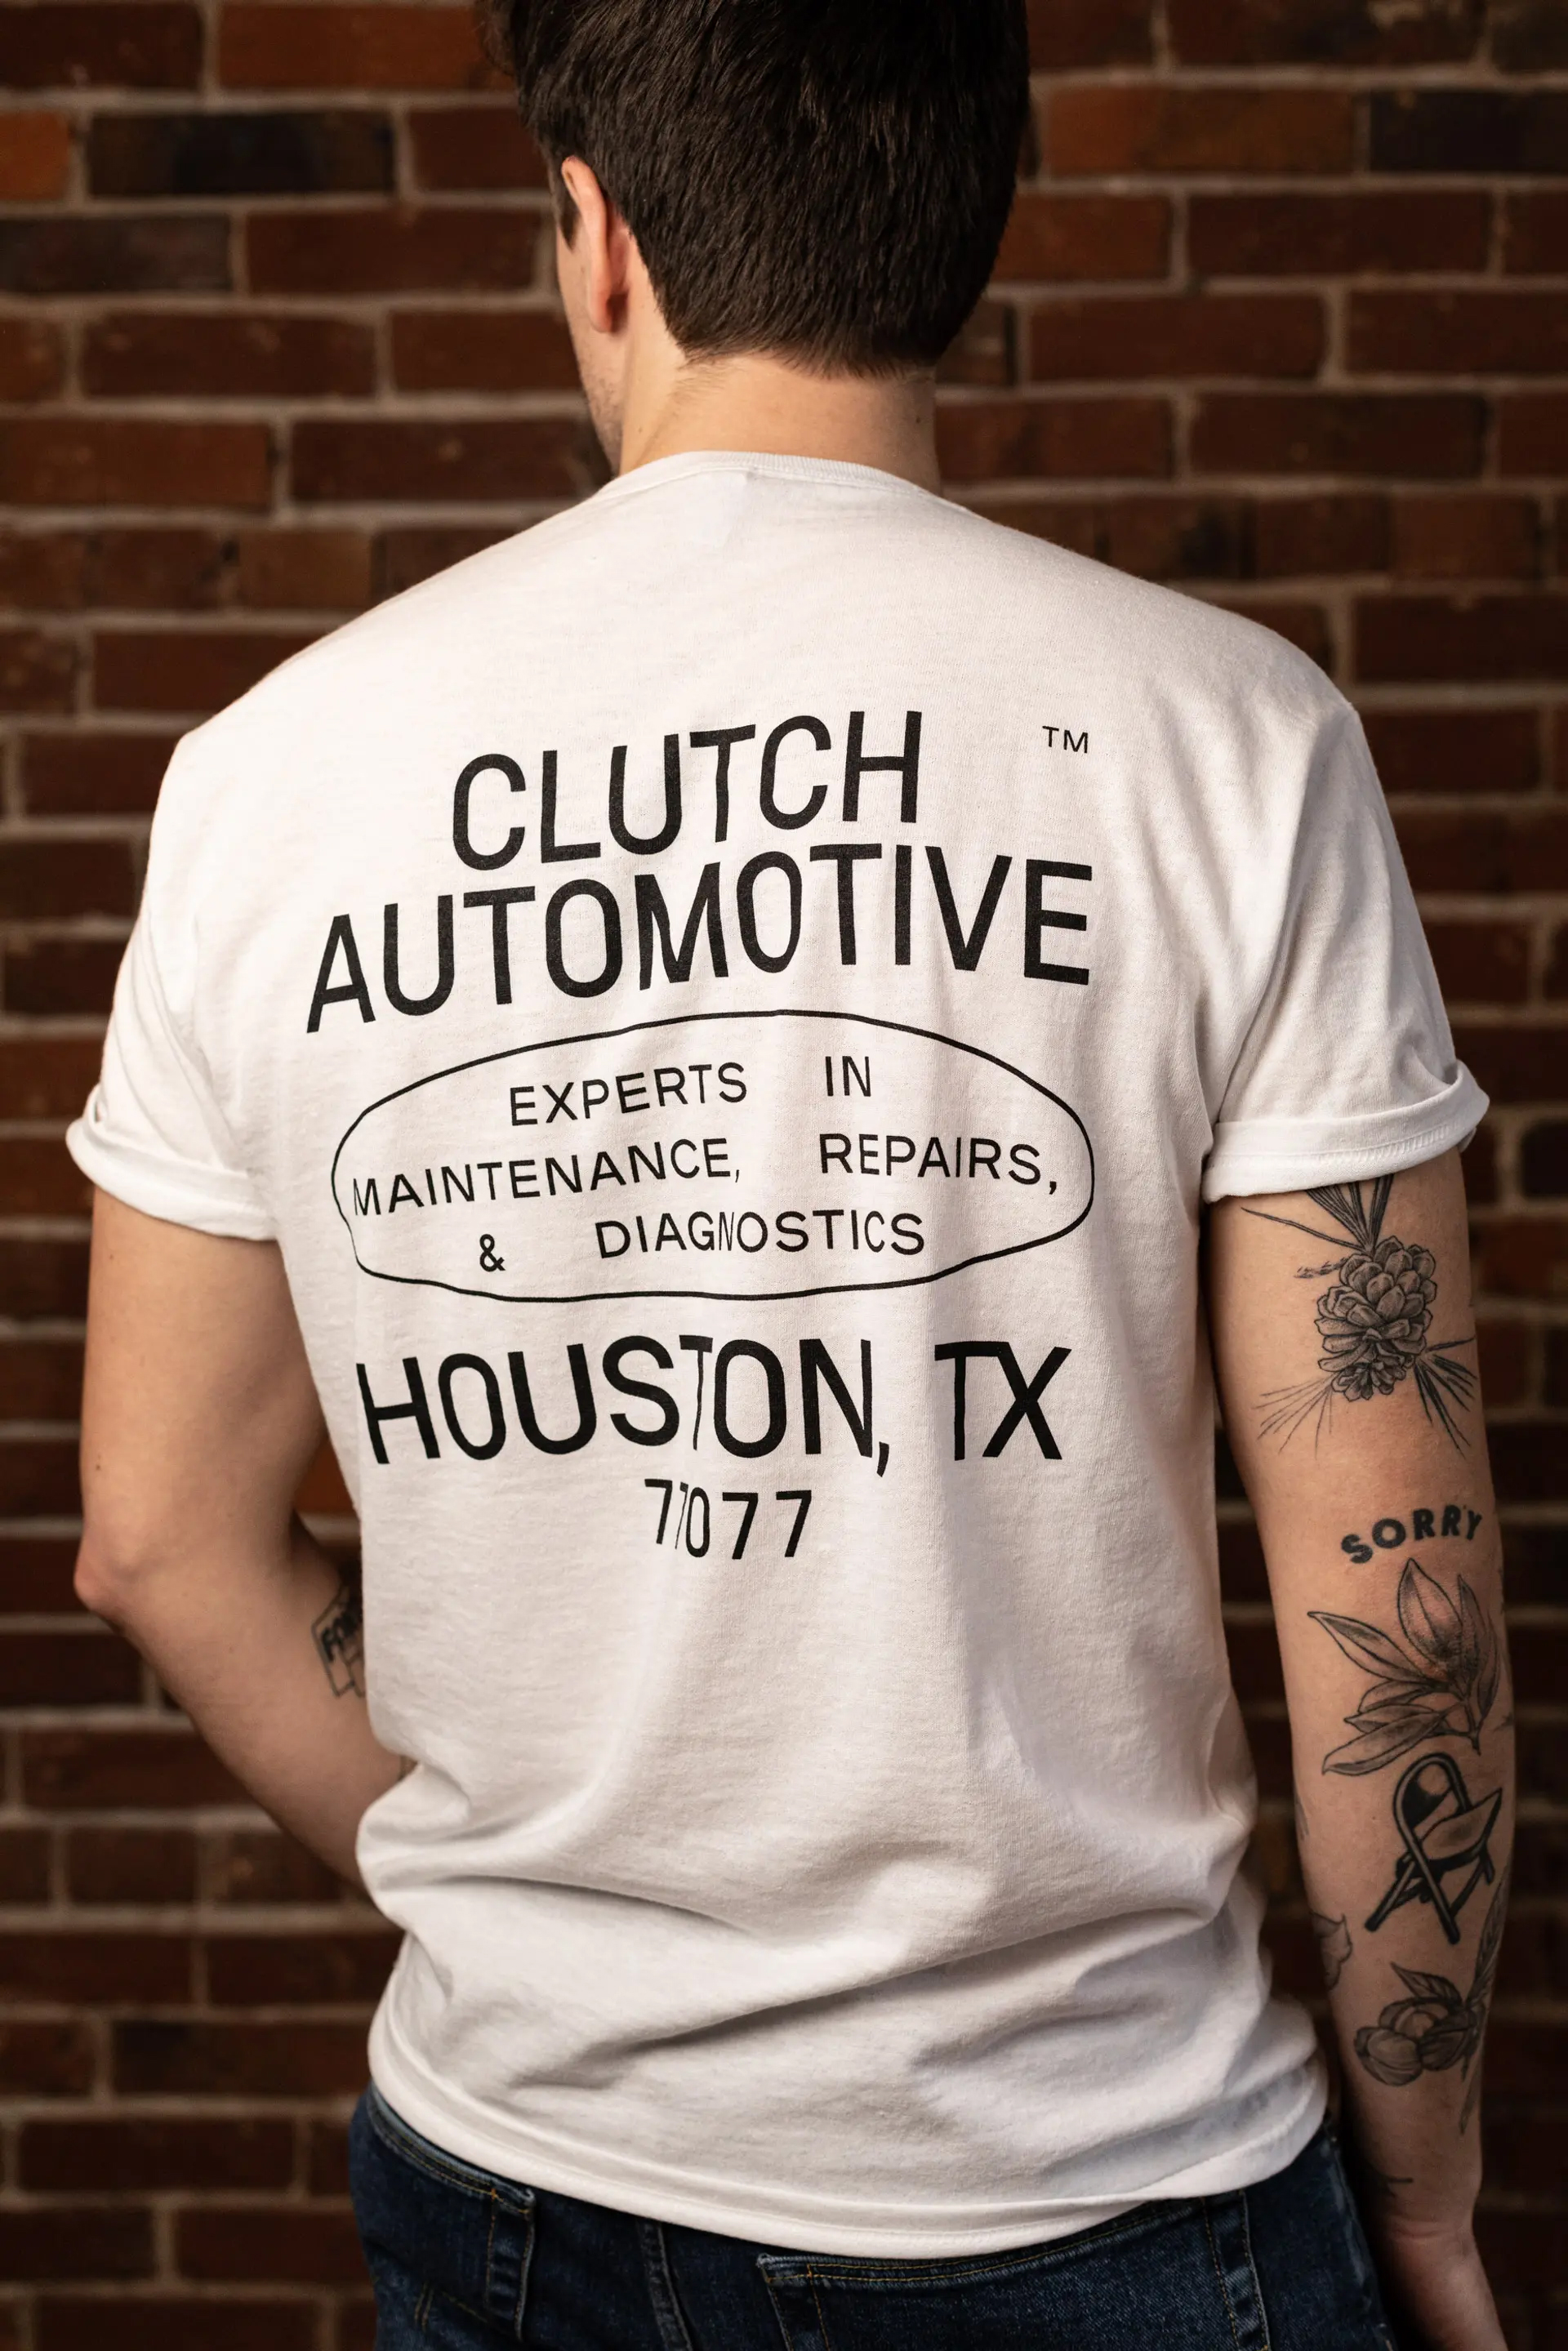 Branded t-shirt by Parker Studio for modern Texas automotive shop and mechanics Clutch